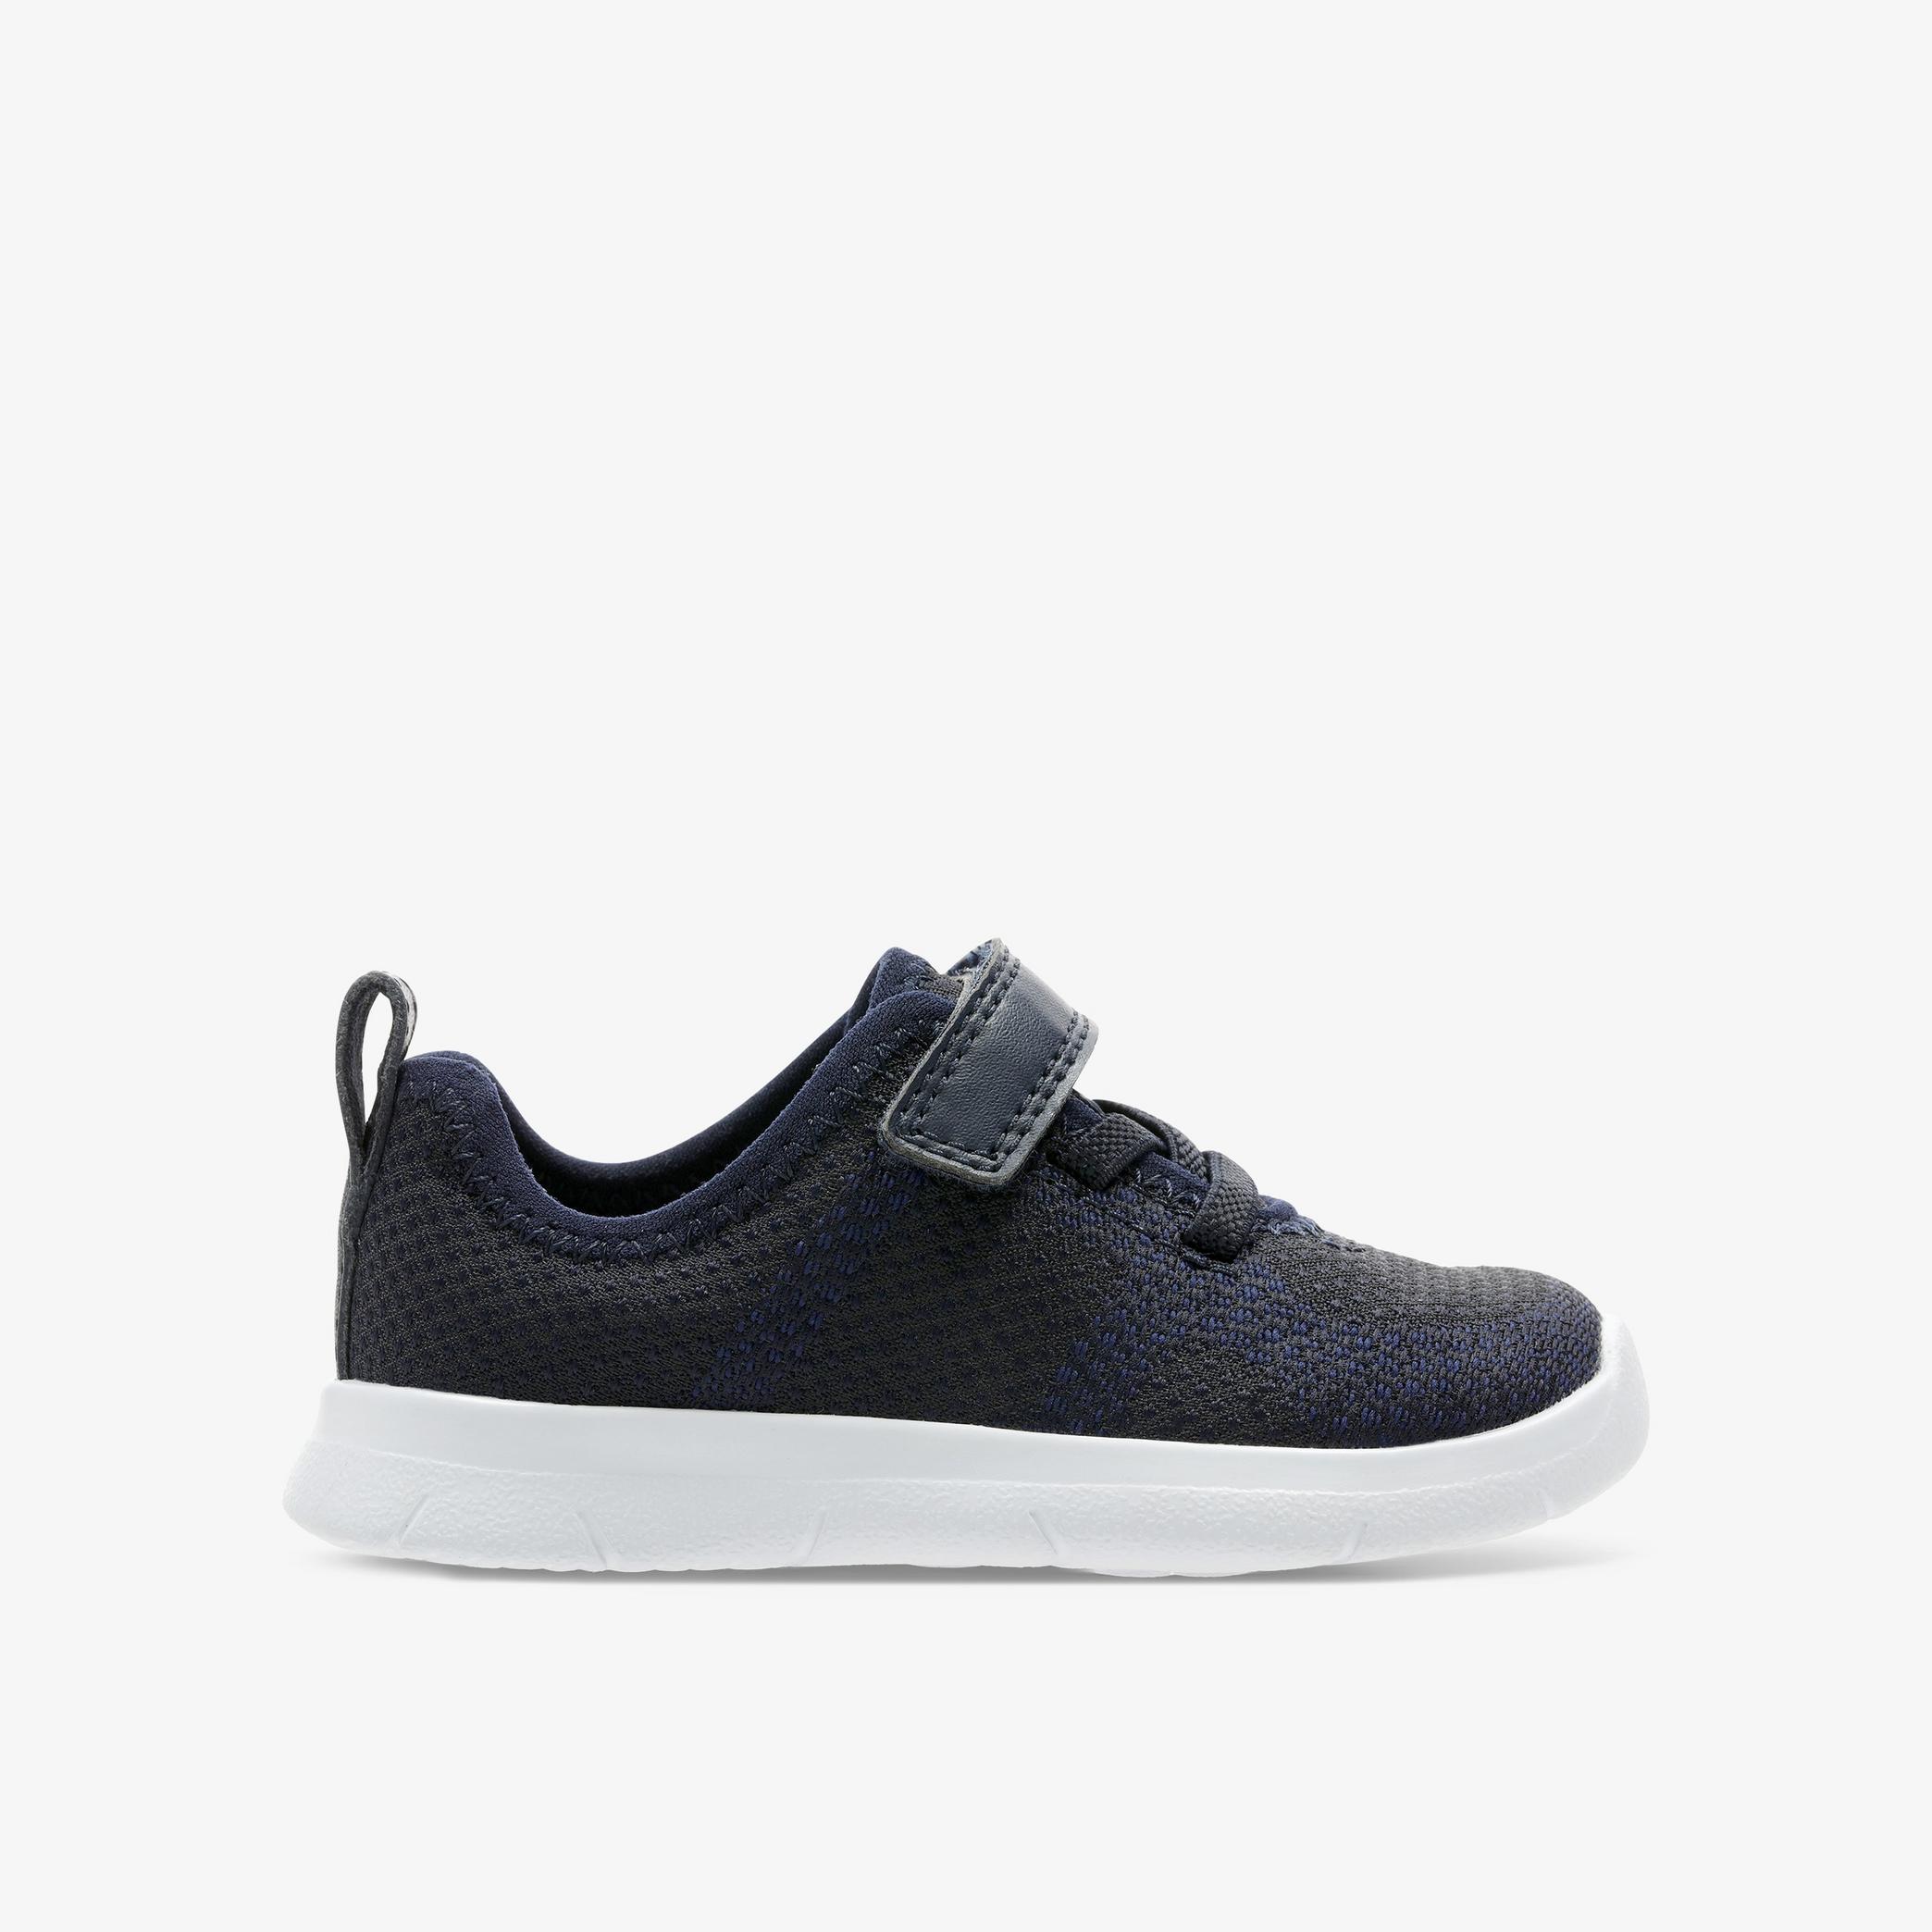 Ath Flux Toddler Navy Trainers, view 1 of 6